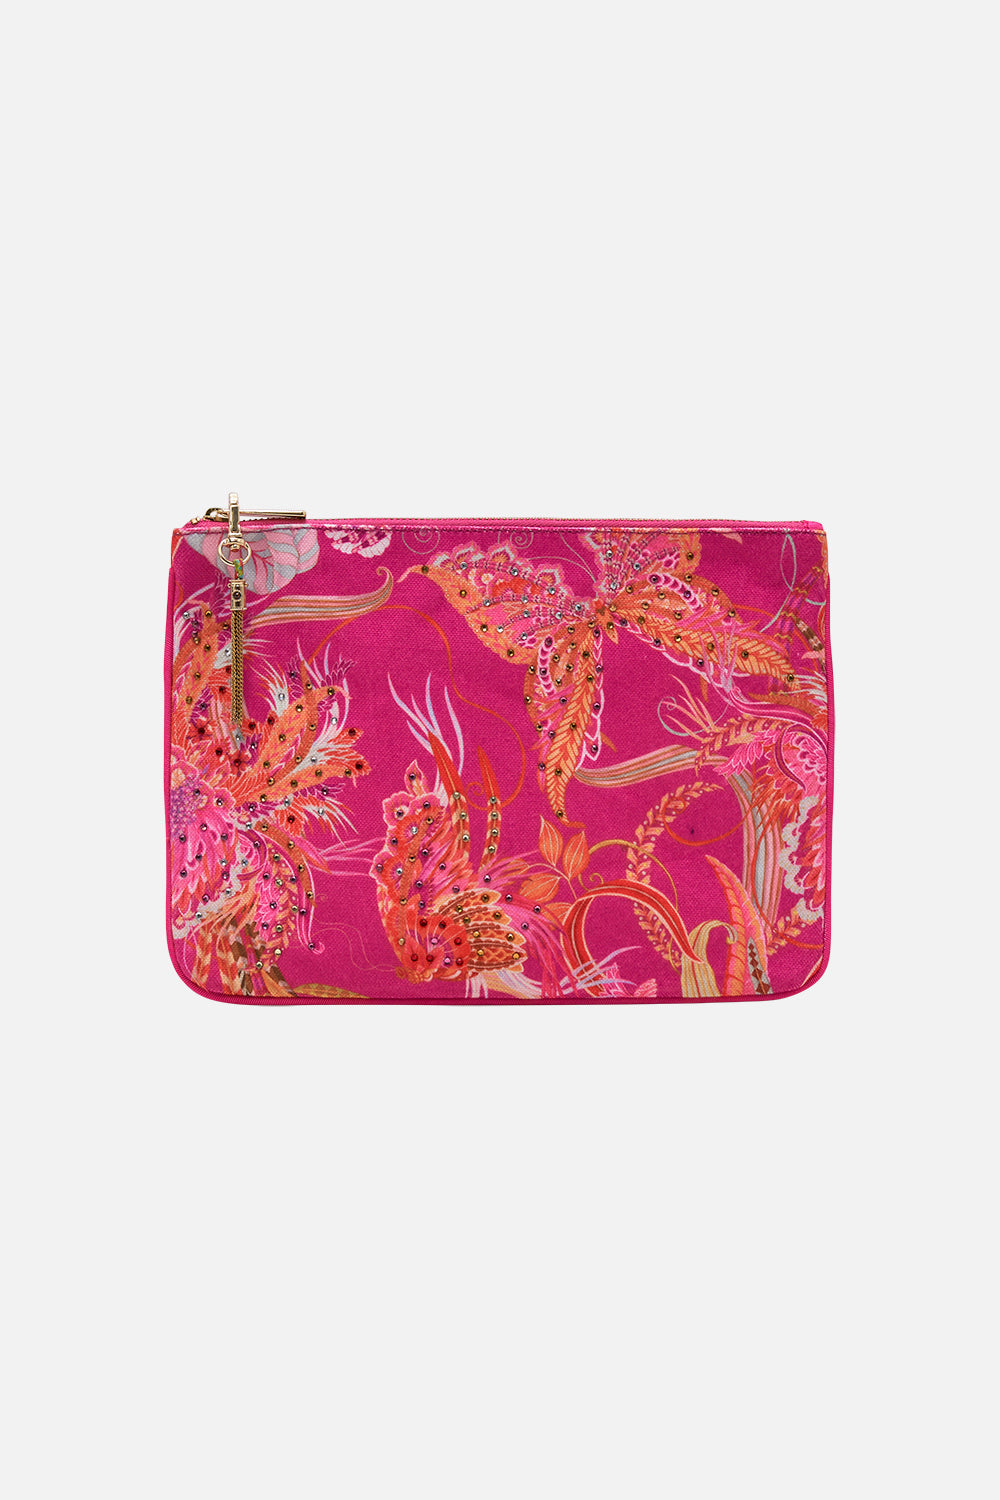 CAMILLA pink clutch bag in A Heart That Flutters 